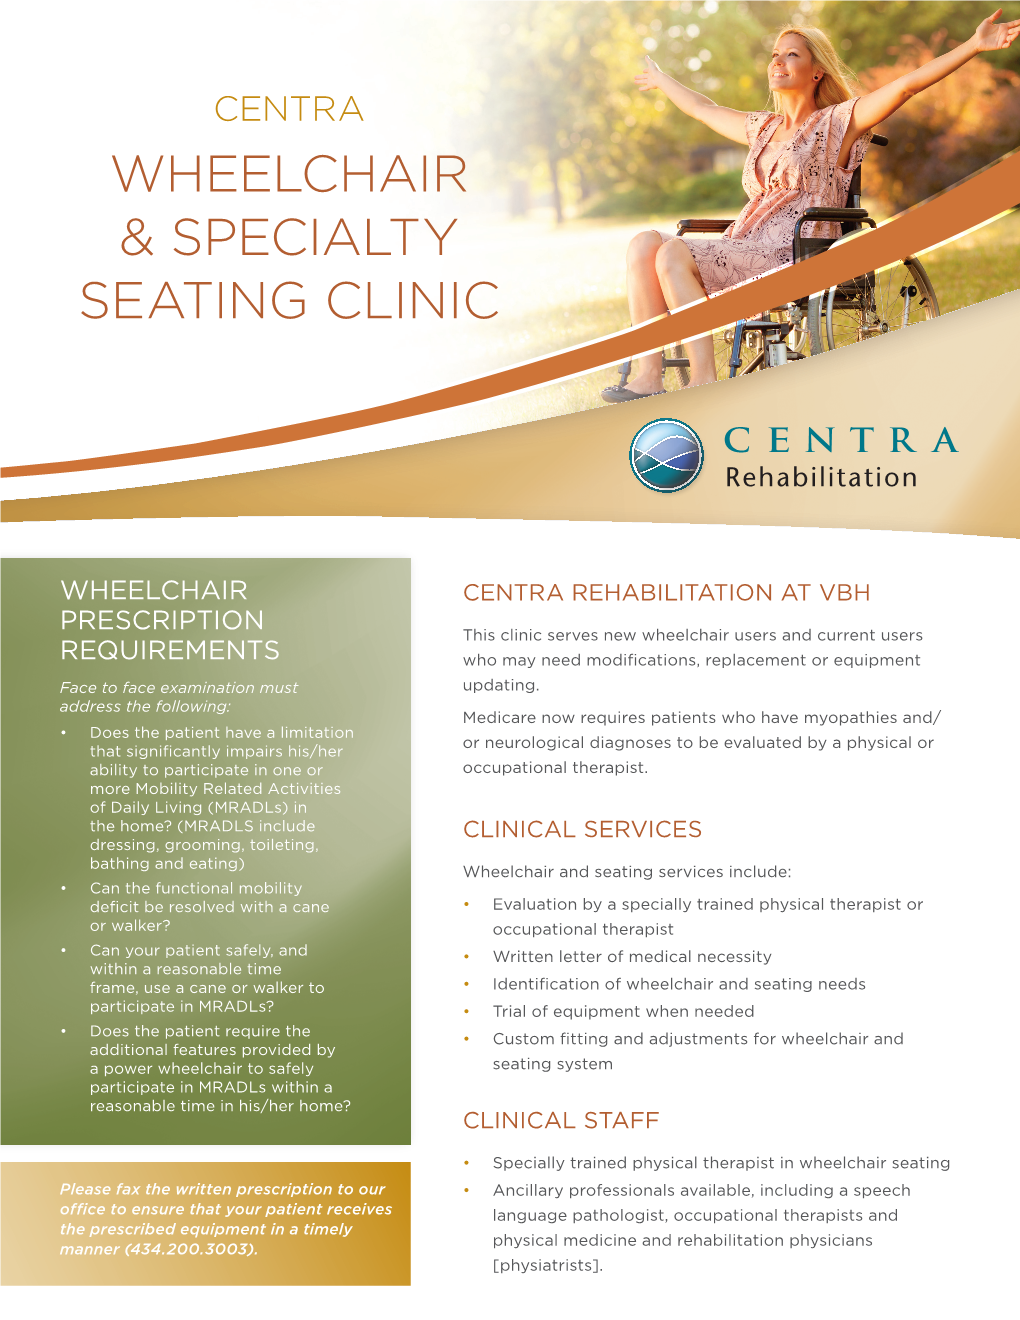 Wheelchair & Specialty Seating Clinic